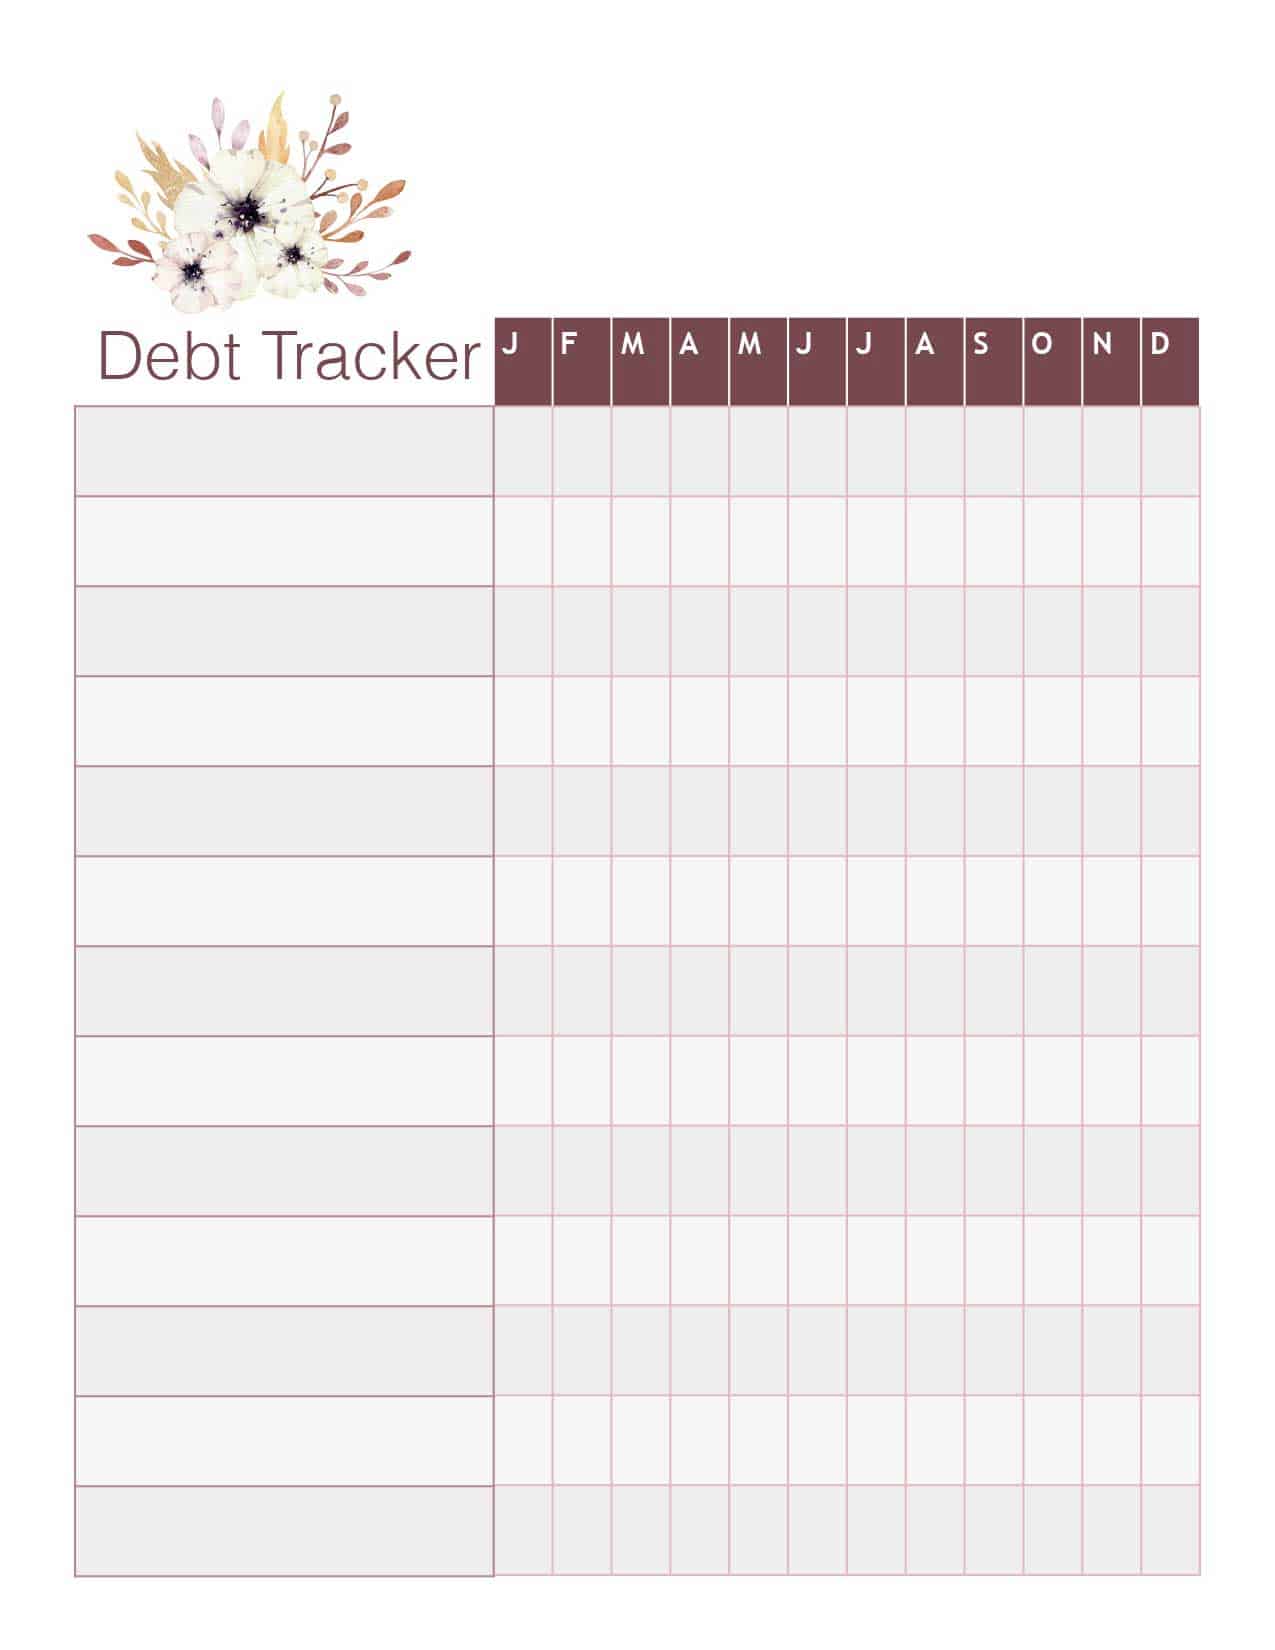 Download your free debt tracker printable